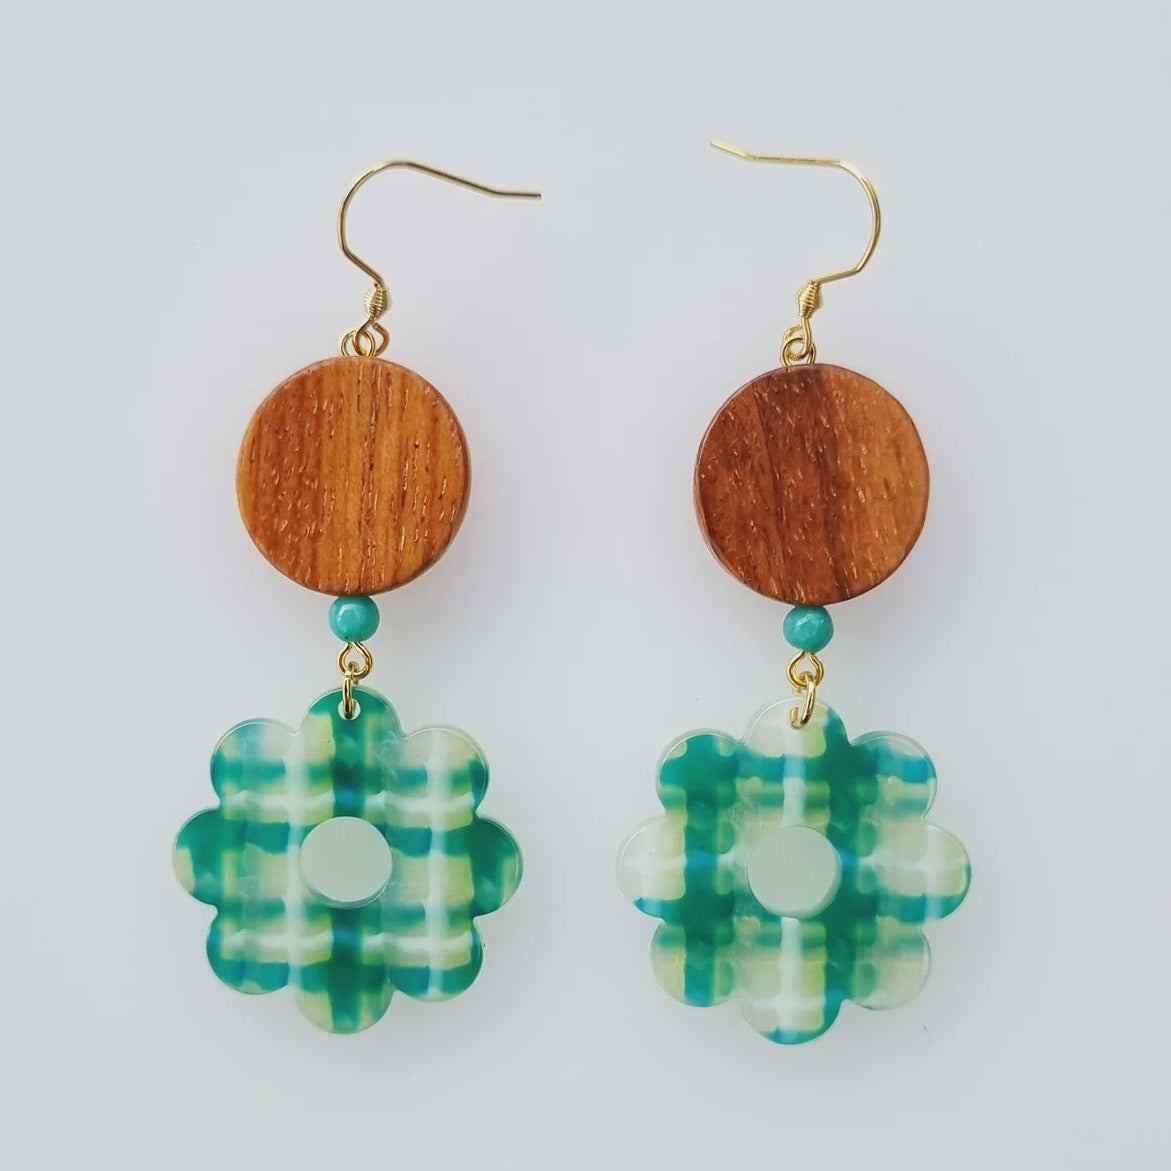 Middle Child Patchling Earrings